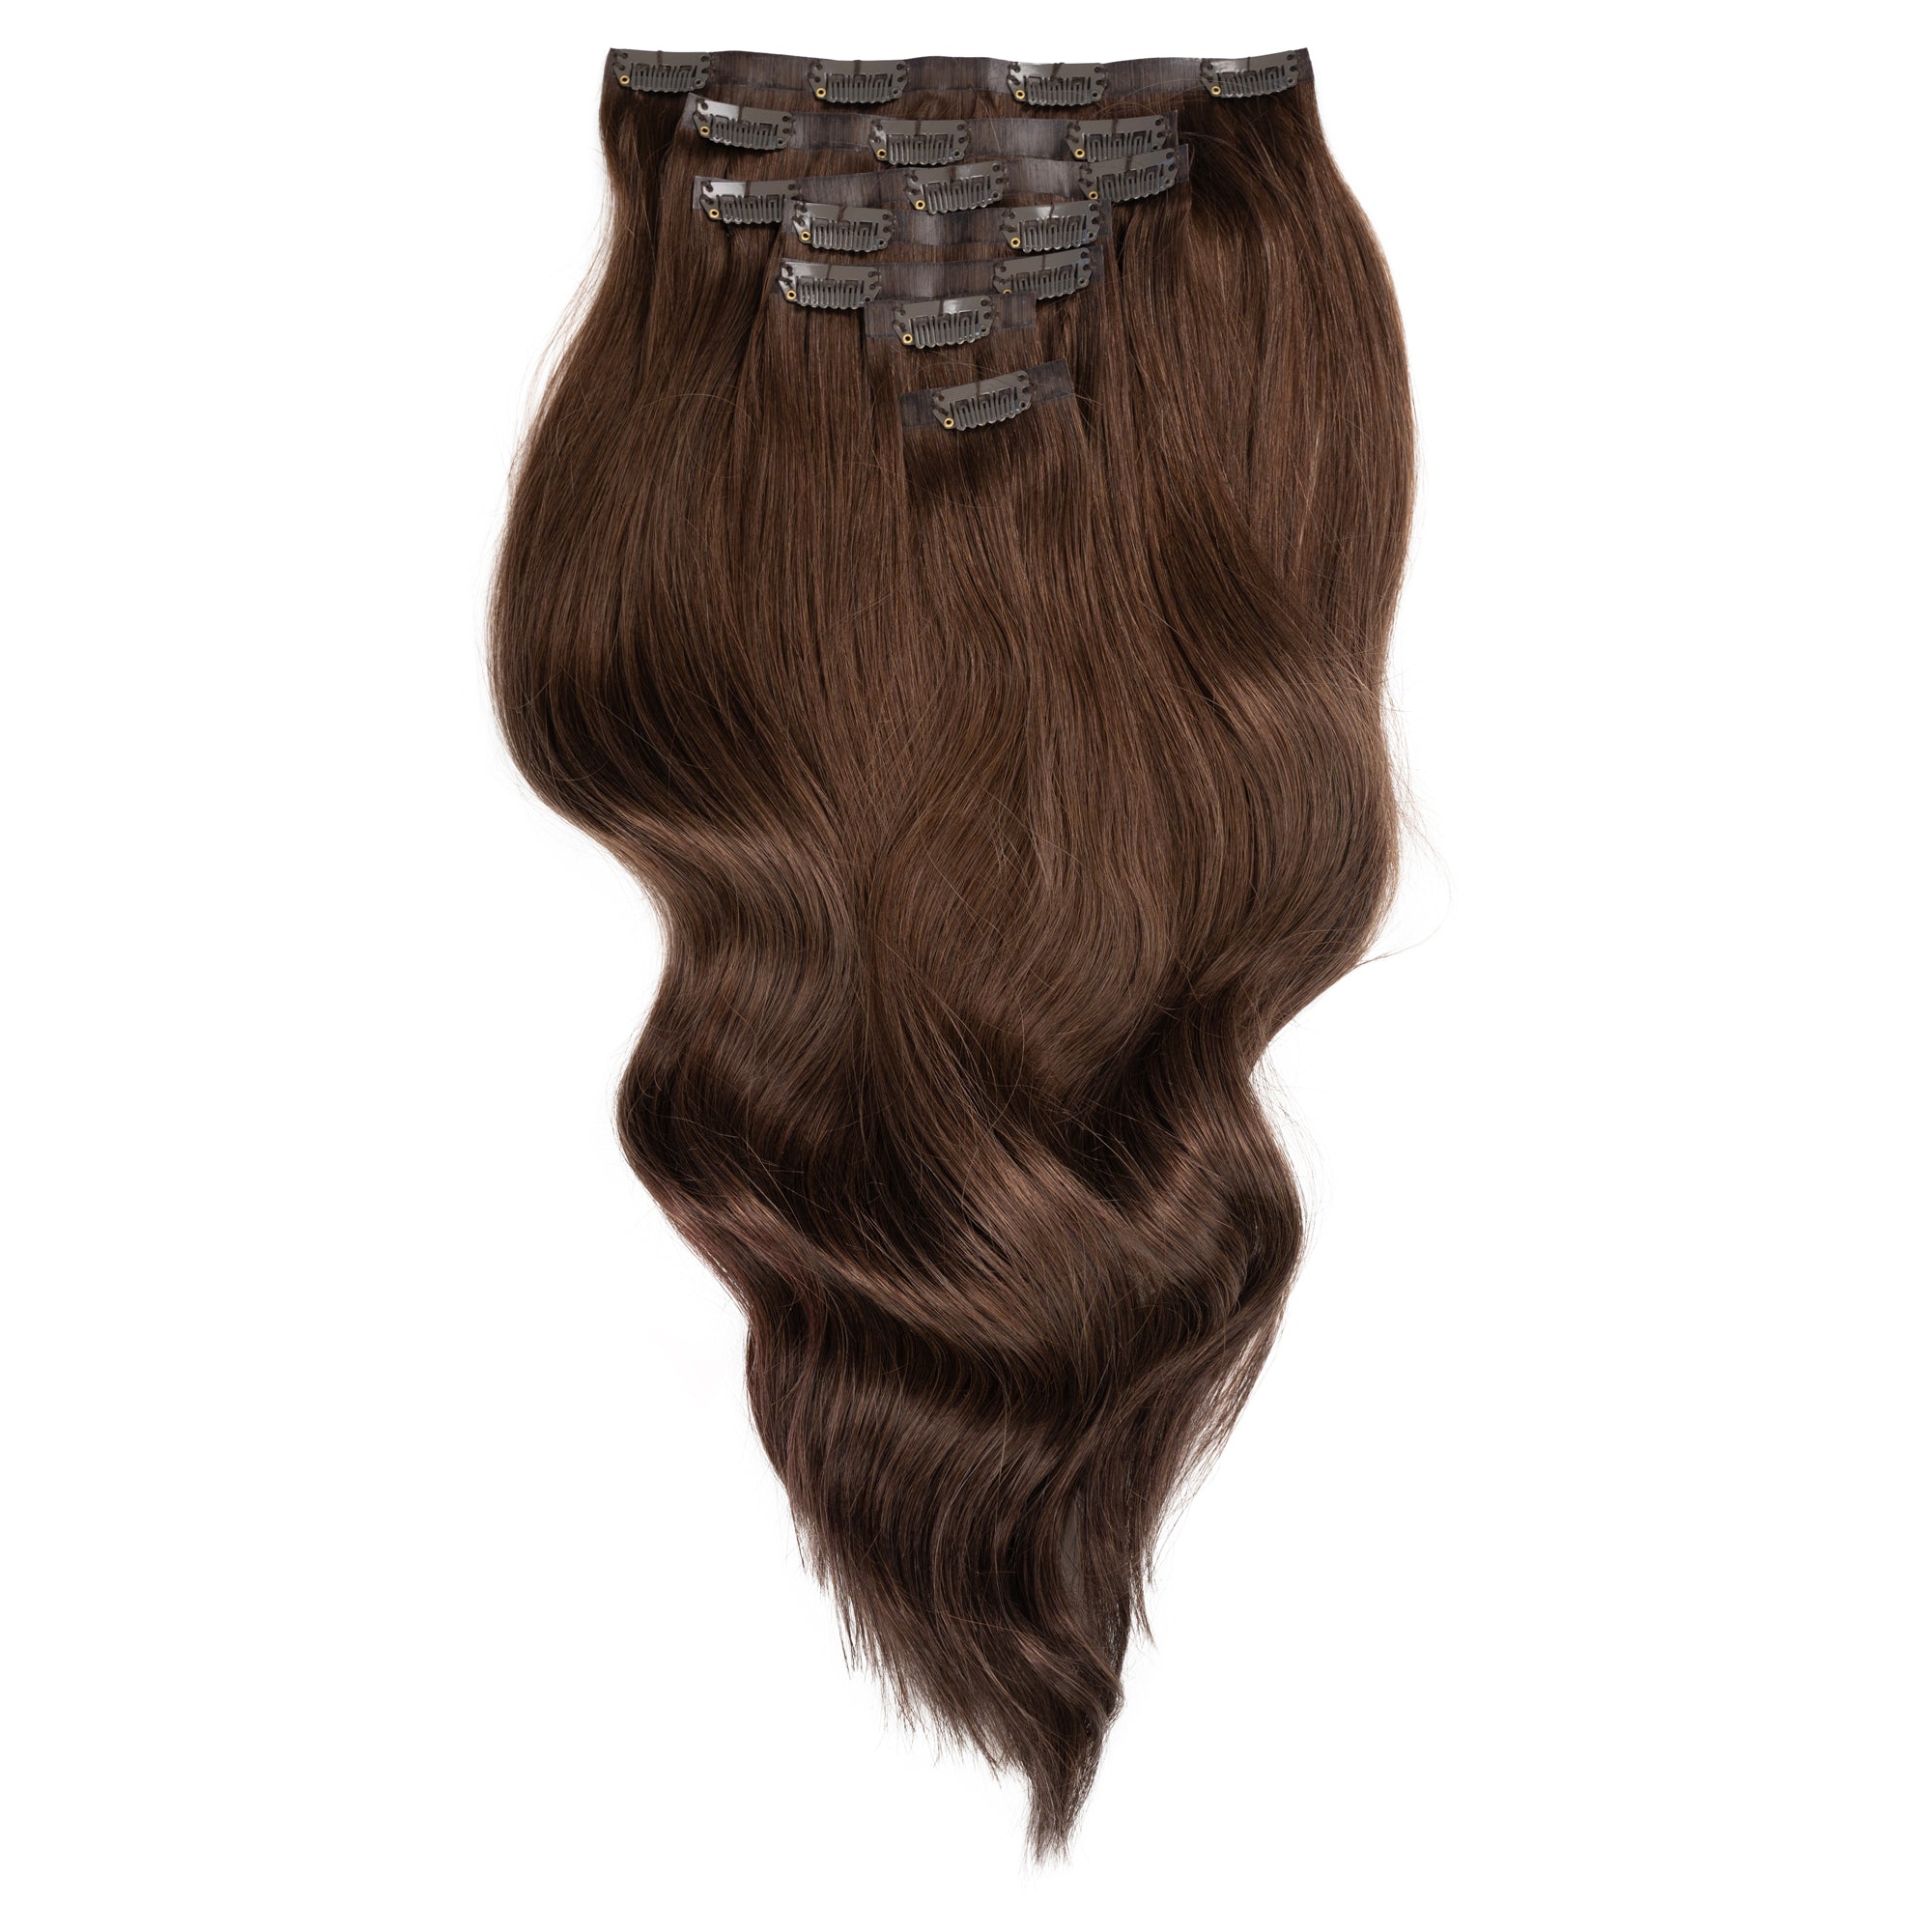 Duchess Elegant Clip-in Hair Extensions 16" Colour 6 Brown - Maneology Hair Extensions